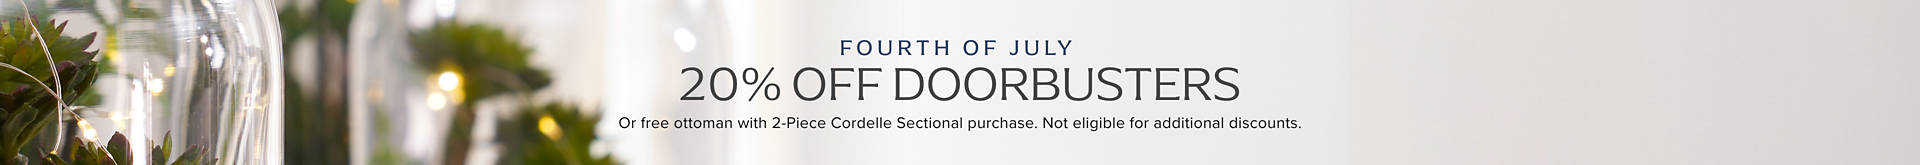 15% Off 4th of July Doorbusters